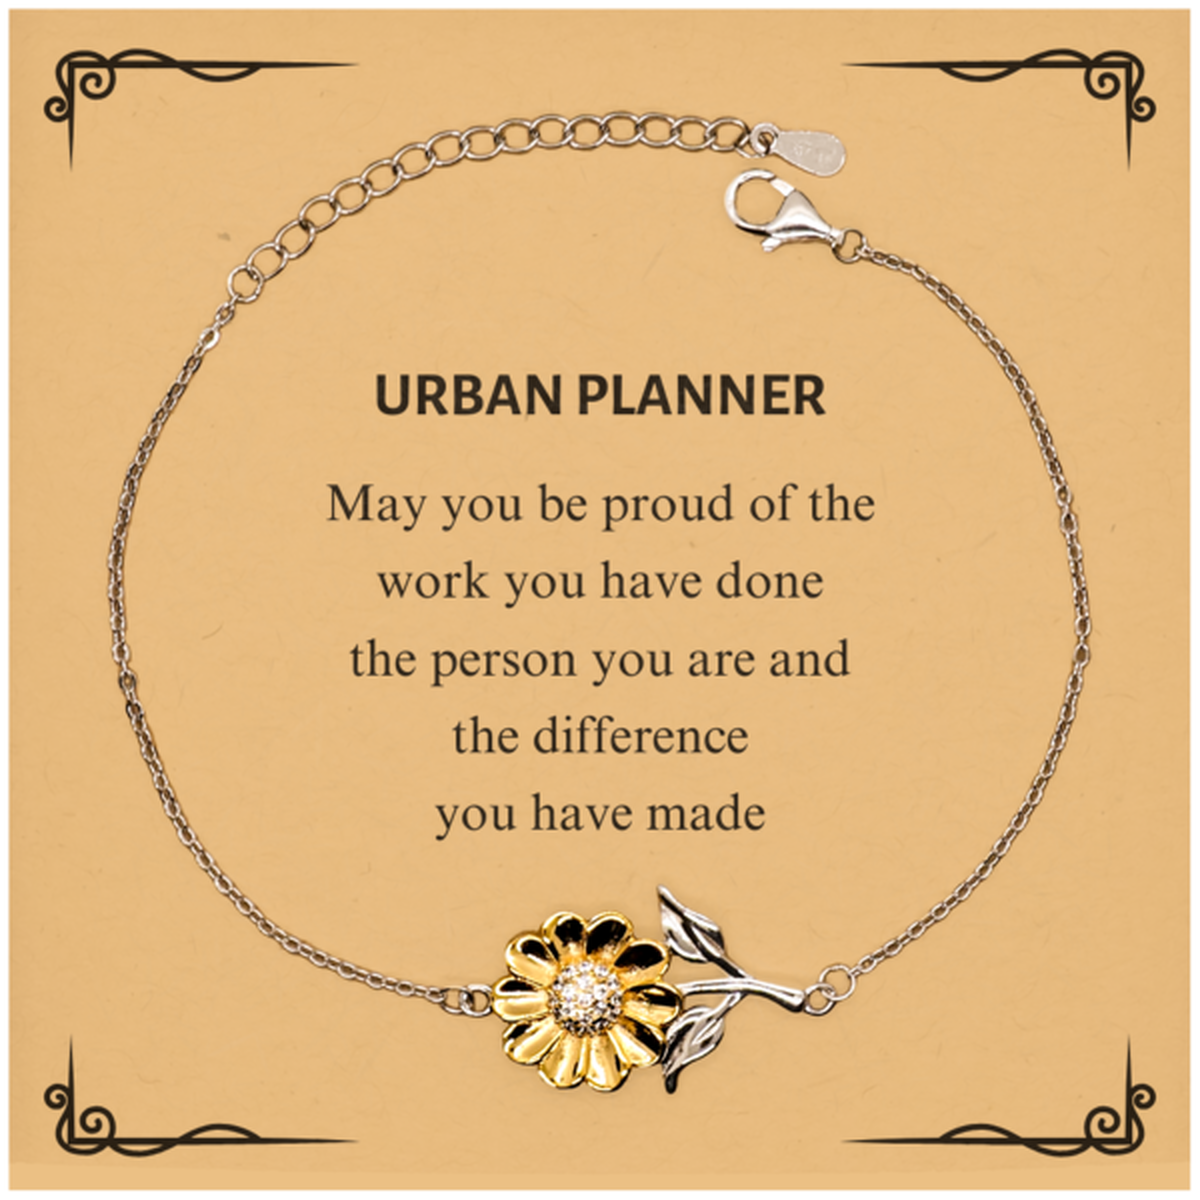 Urban Planner May you be proud of the work you have done, Retirement Urban Planner Sunflower Bracelet for Colleague Appreciation Gifts Amazing for Urban Planner